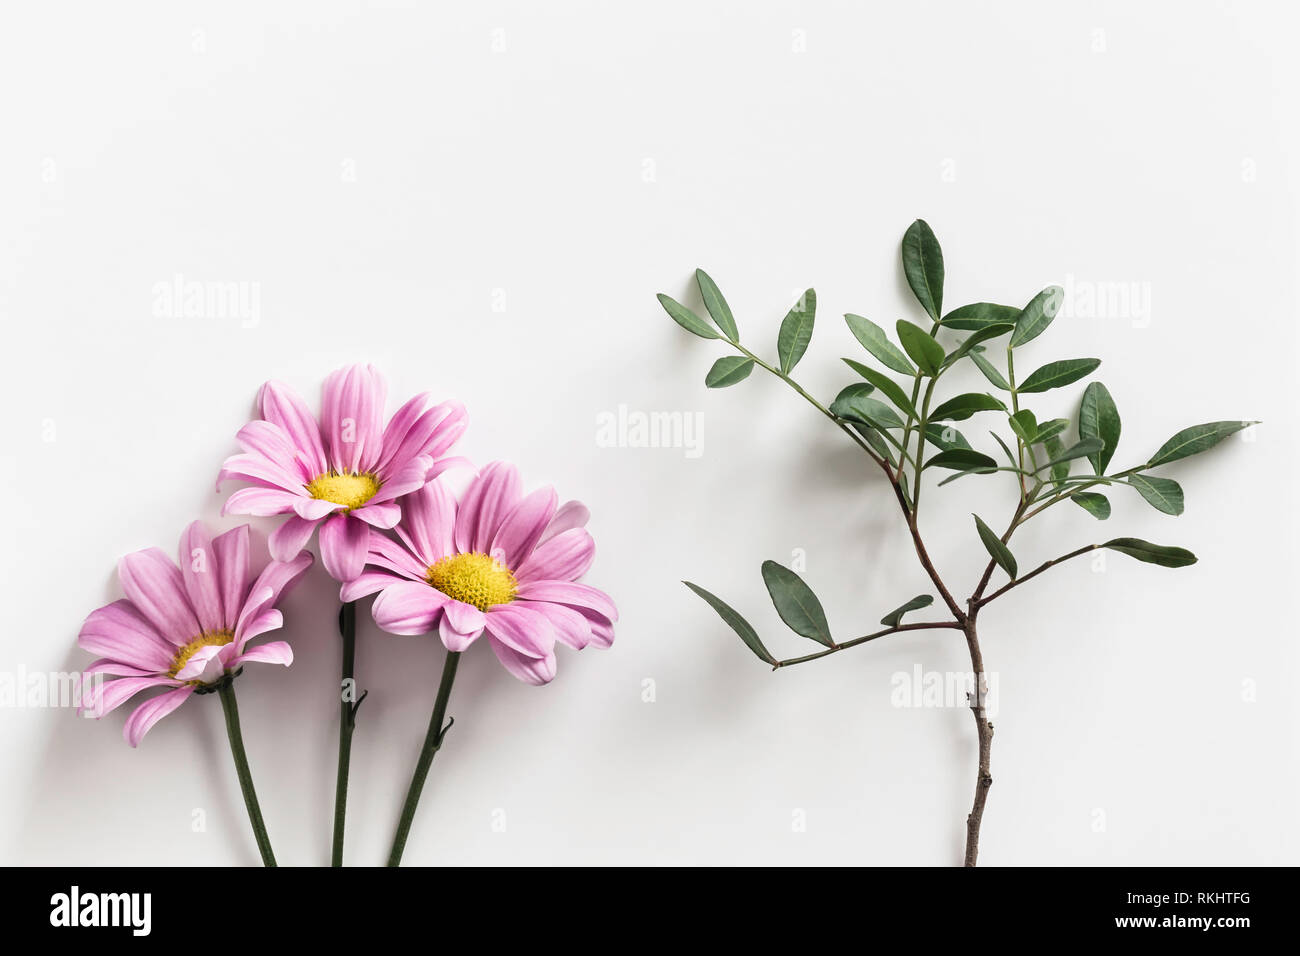 Flat lay of three pink daisy flowers next to a twig of leaves laid out to look like a tree, on a white background Stock Photo